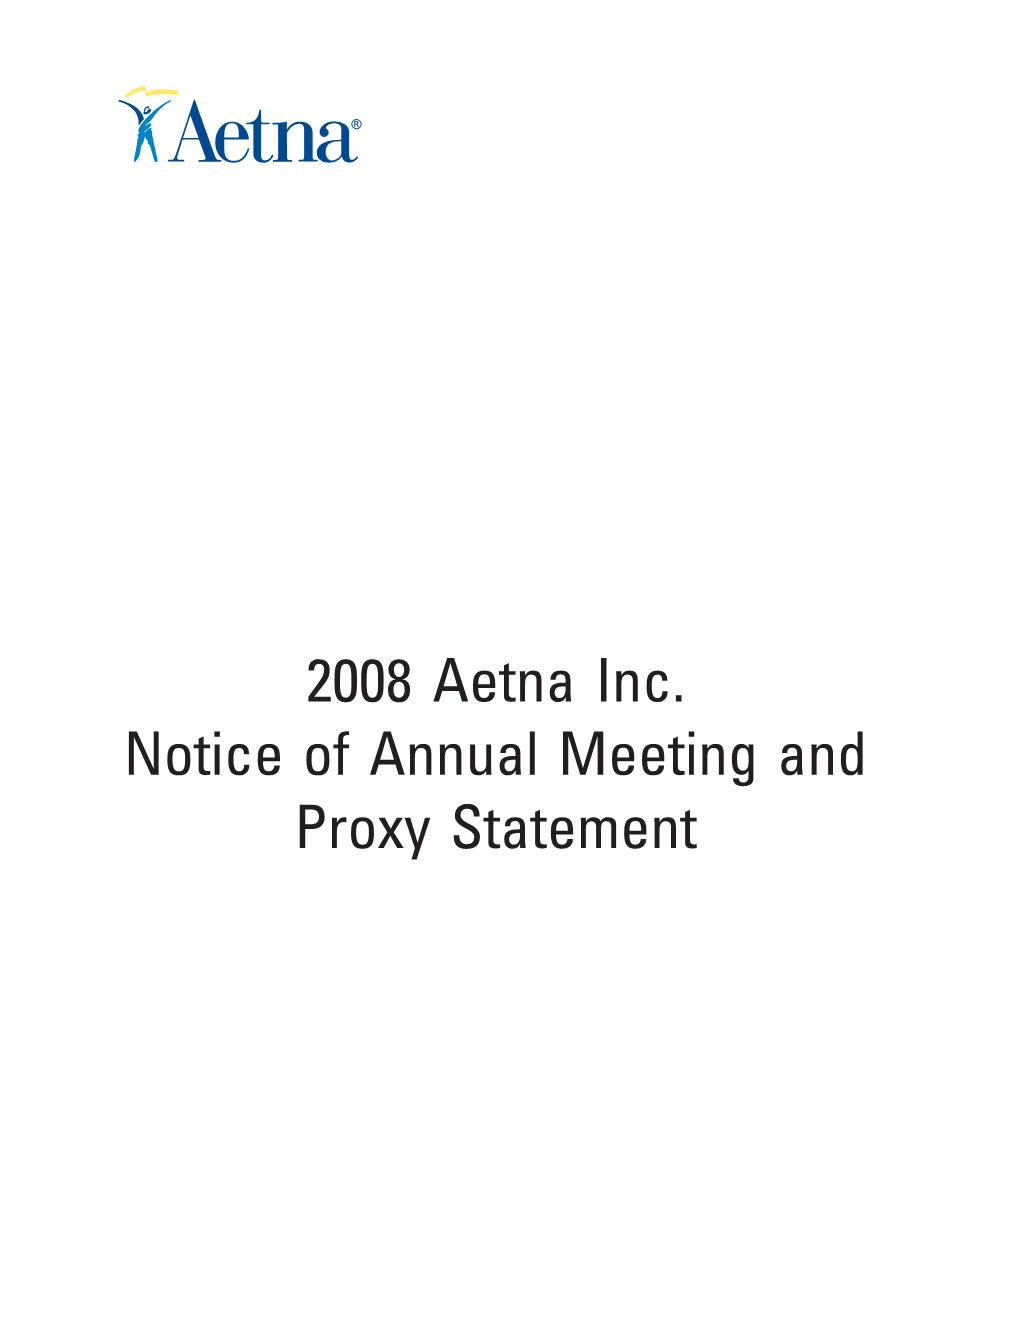 2008 Aetna Inc. Notice of Annual Meeting and Proxy Statement Aetna Inc